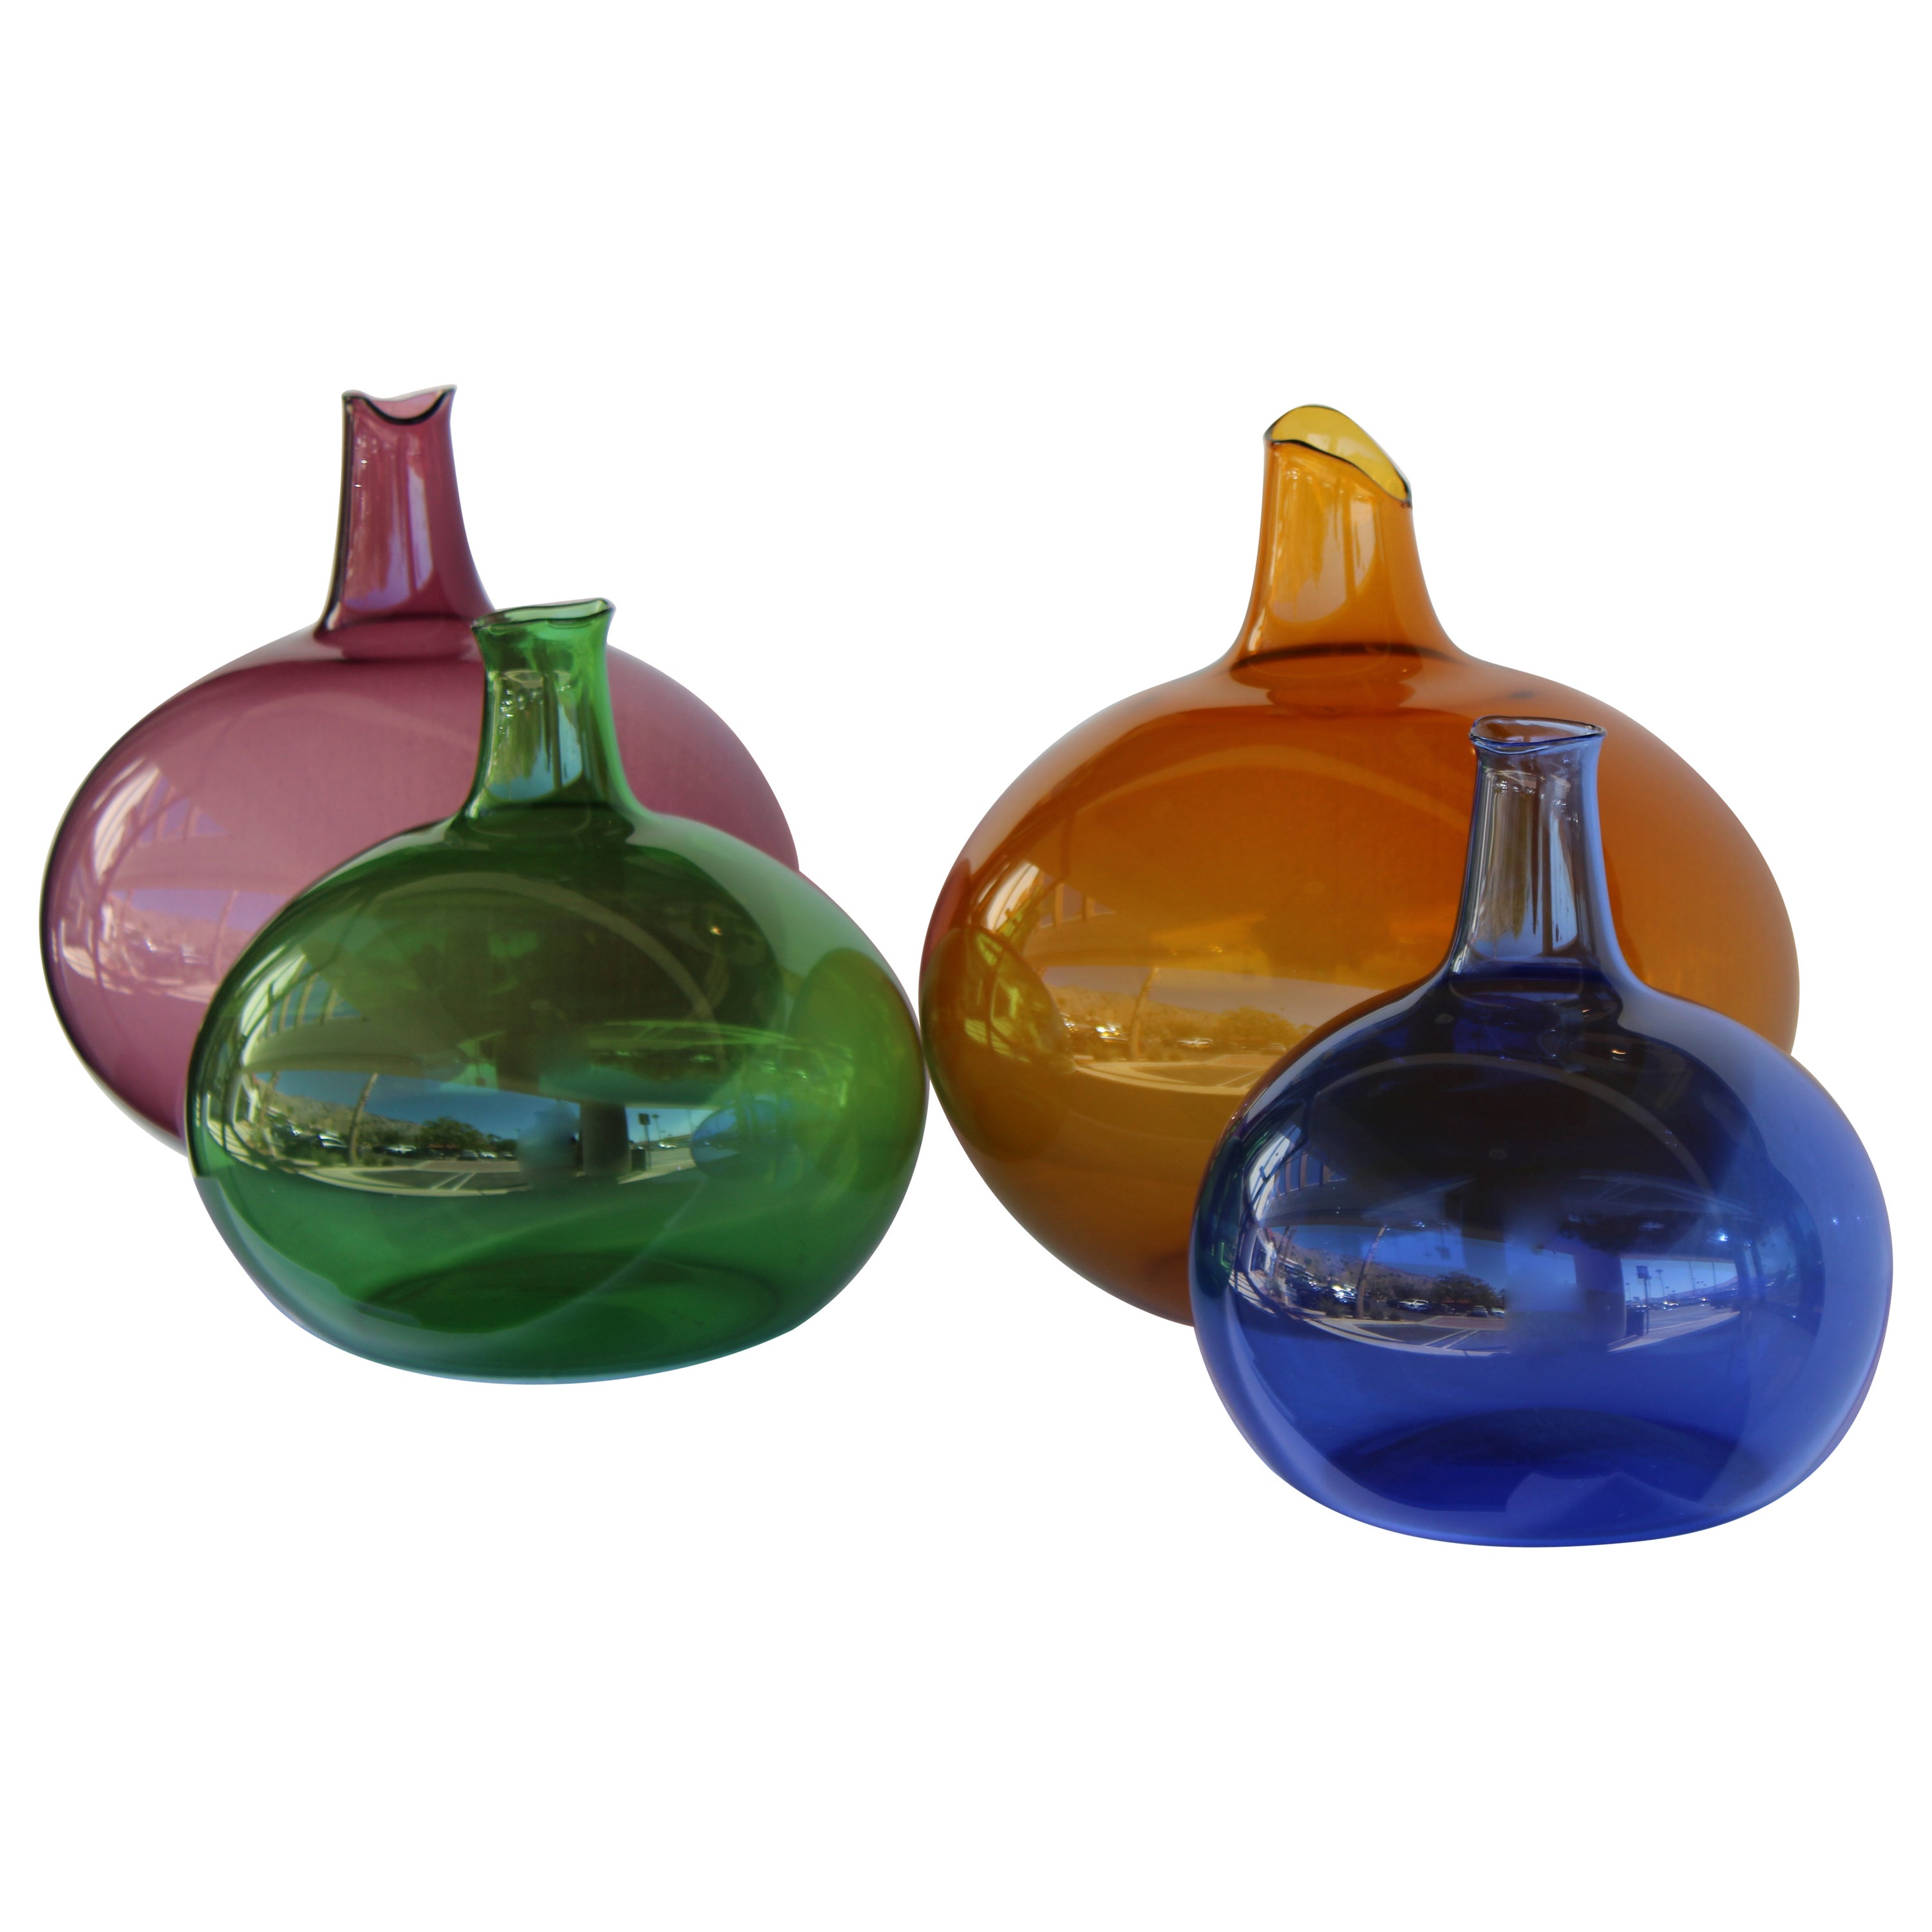 Four Hand Blown Glass Vessels by the Zeller Glass Company For Sale